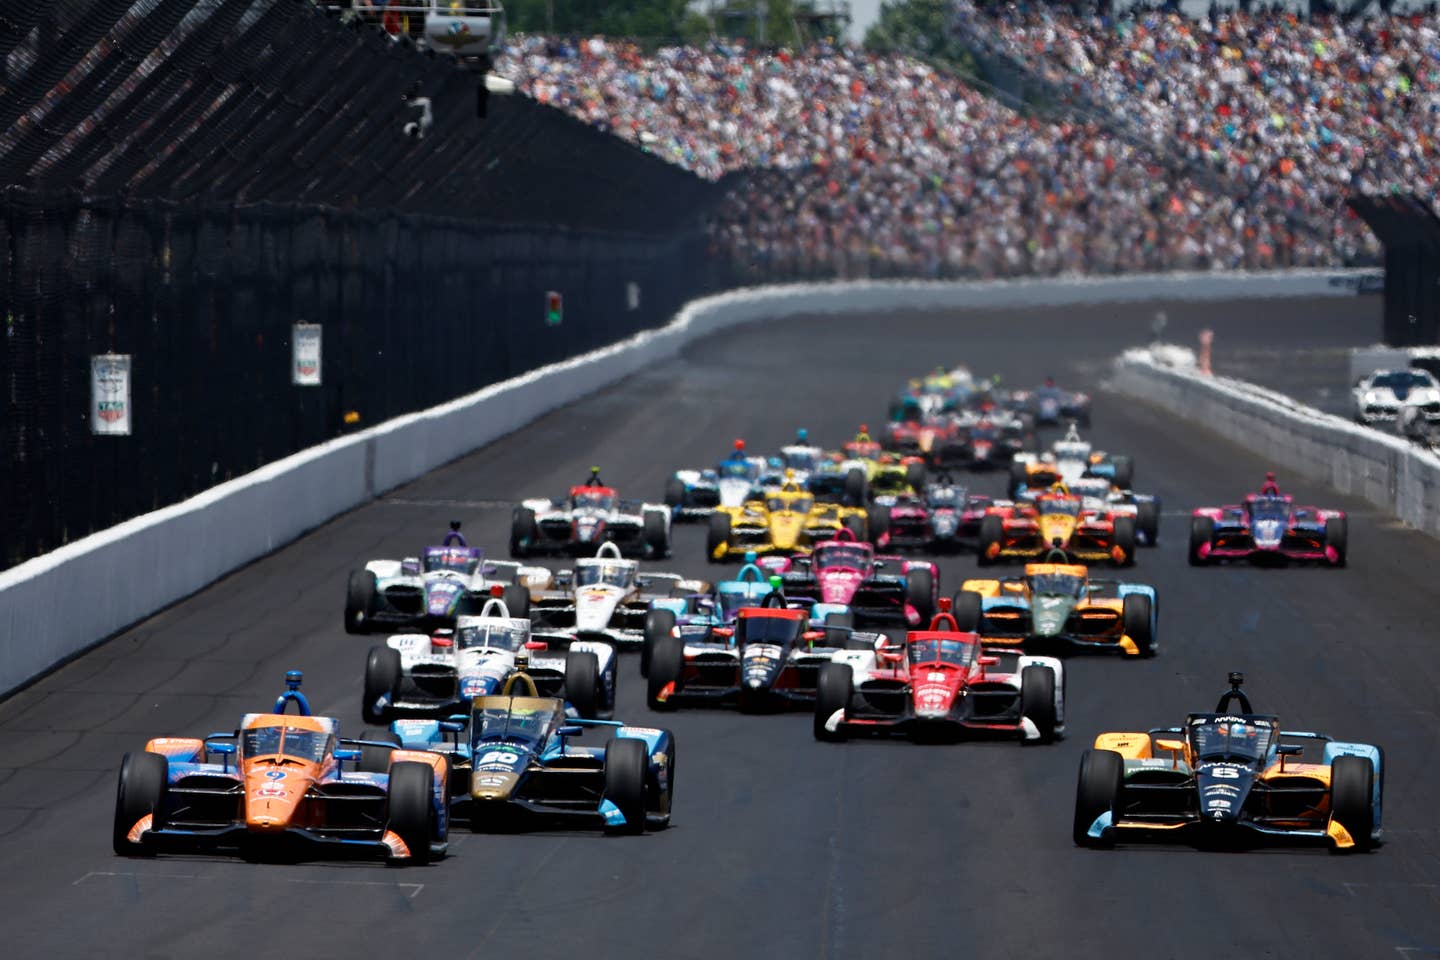 INDIANAPOLIS, INDIANA - MAY 29: Scott Dixon, driver of the #9 PNC Bank Chip Ganassi Racing Honda,  leads the field during the 106th running of the Indianapolis 500 at Indianapolis Motor Speedway on May 29, 2022 in Indianapolis, Indiana. (Photo by Chris Graythen/Getty Images)